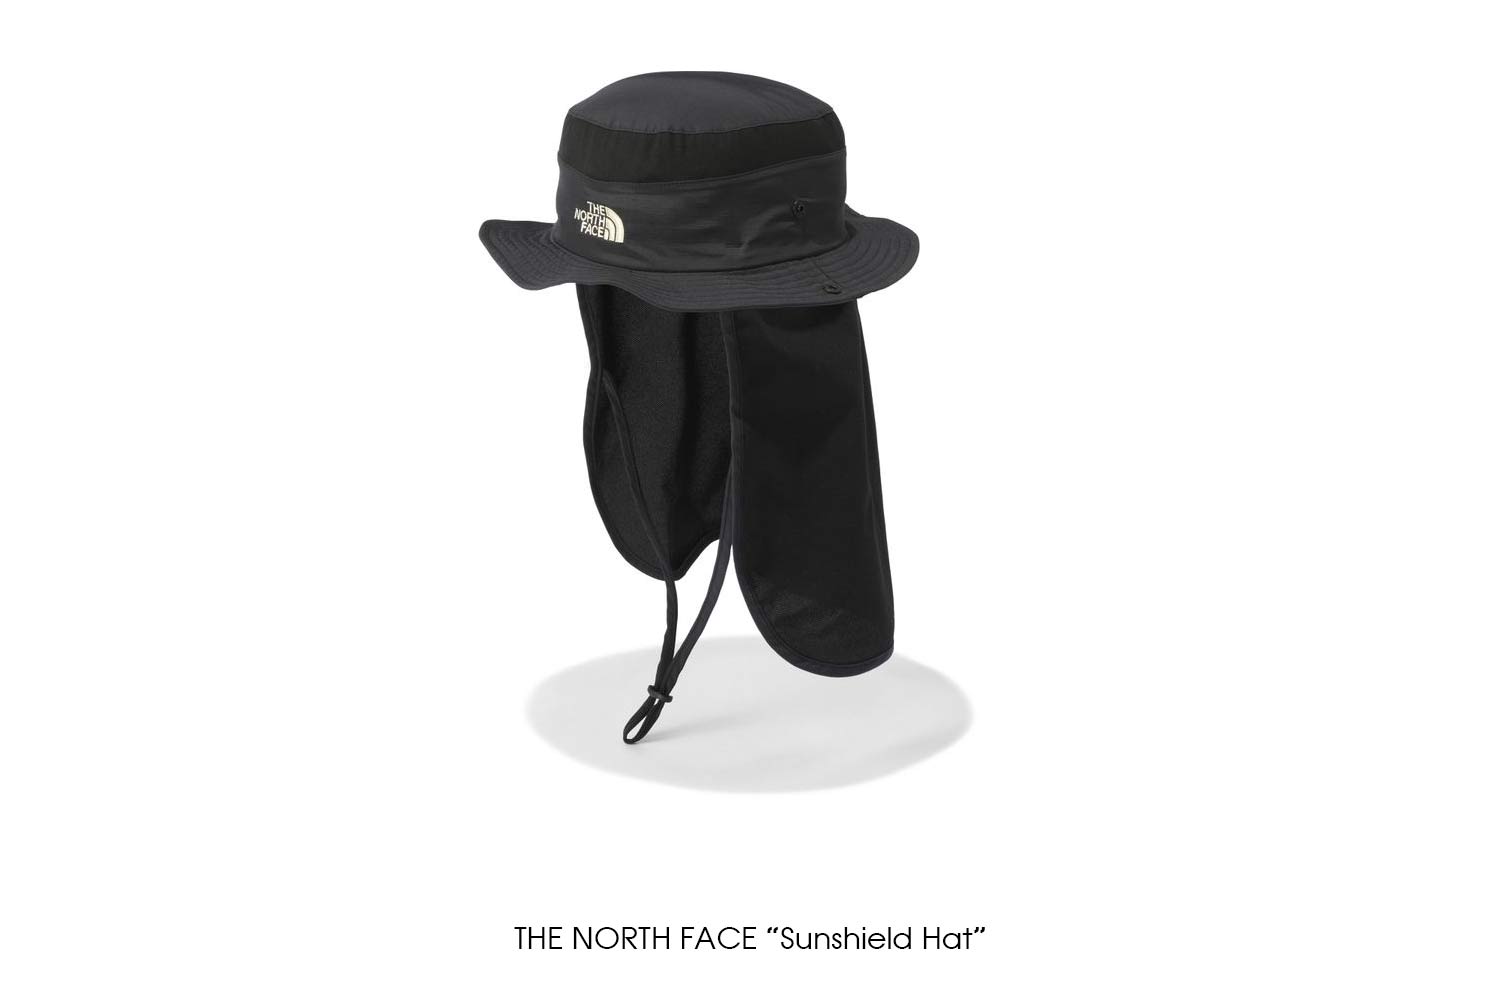 THE NORTH FACE "Sunshield Hat"